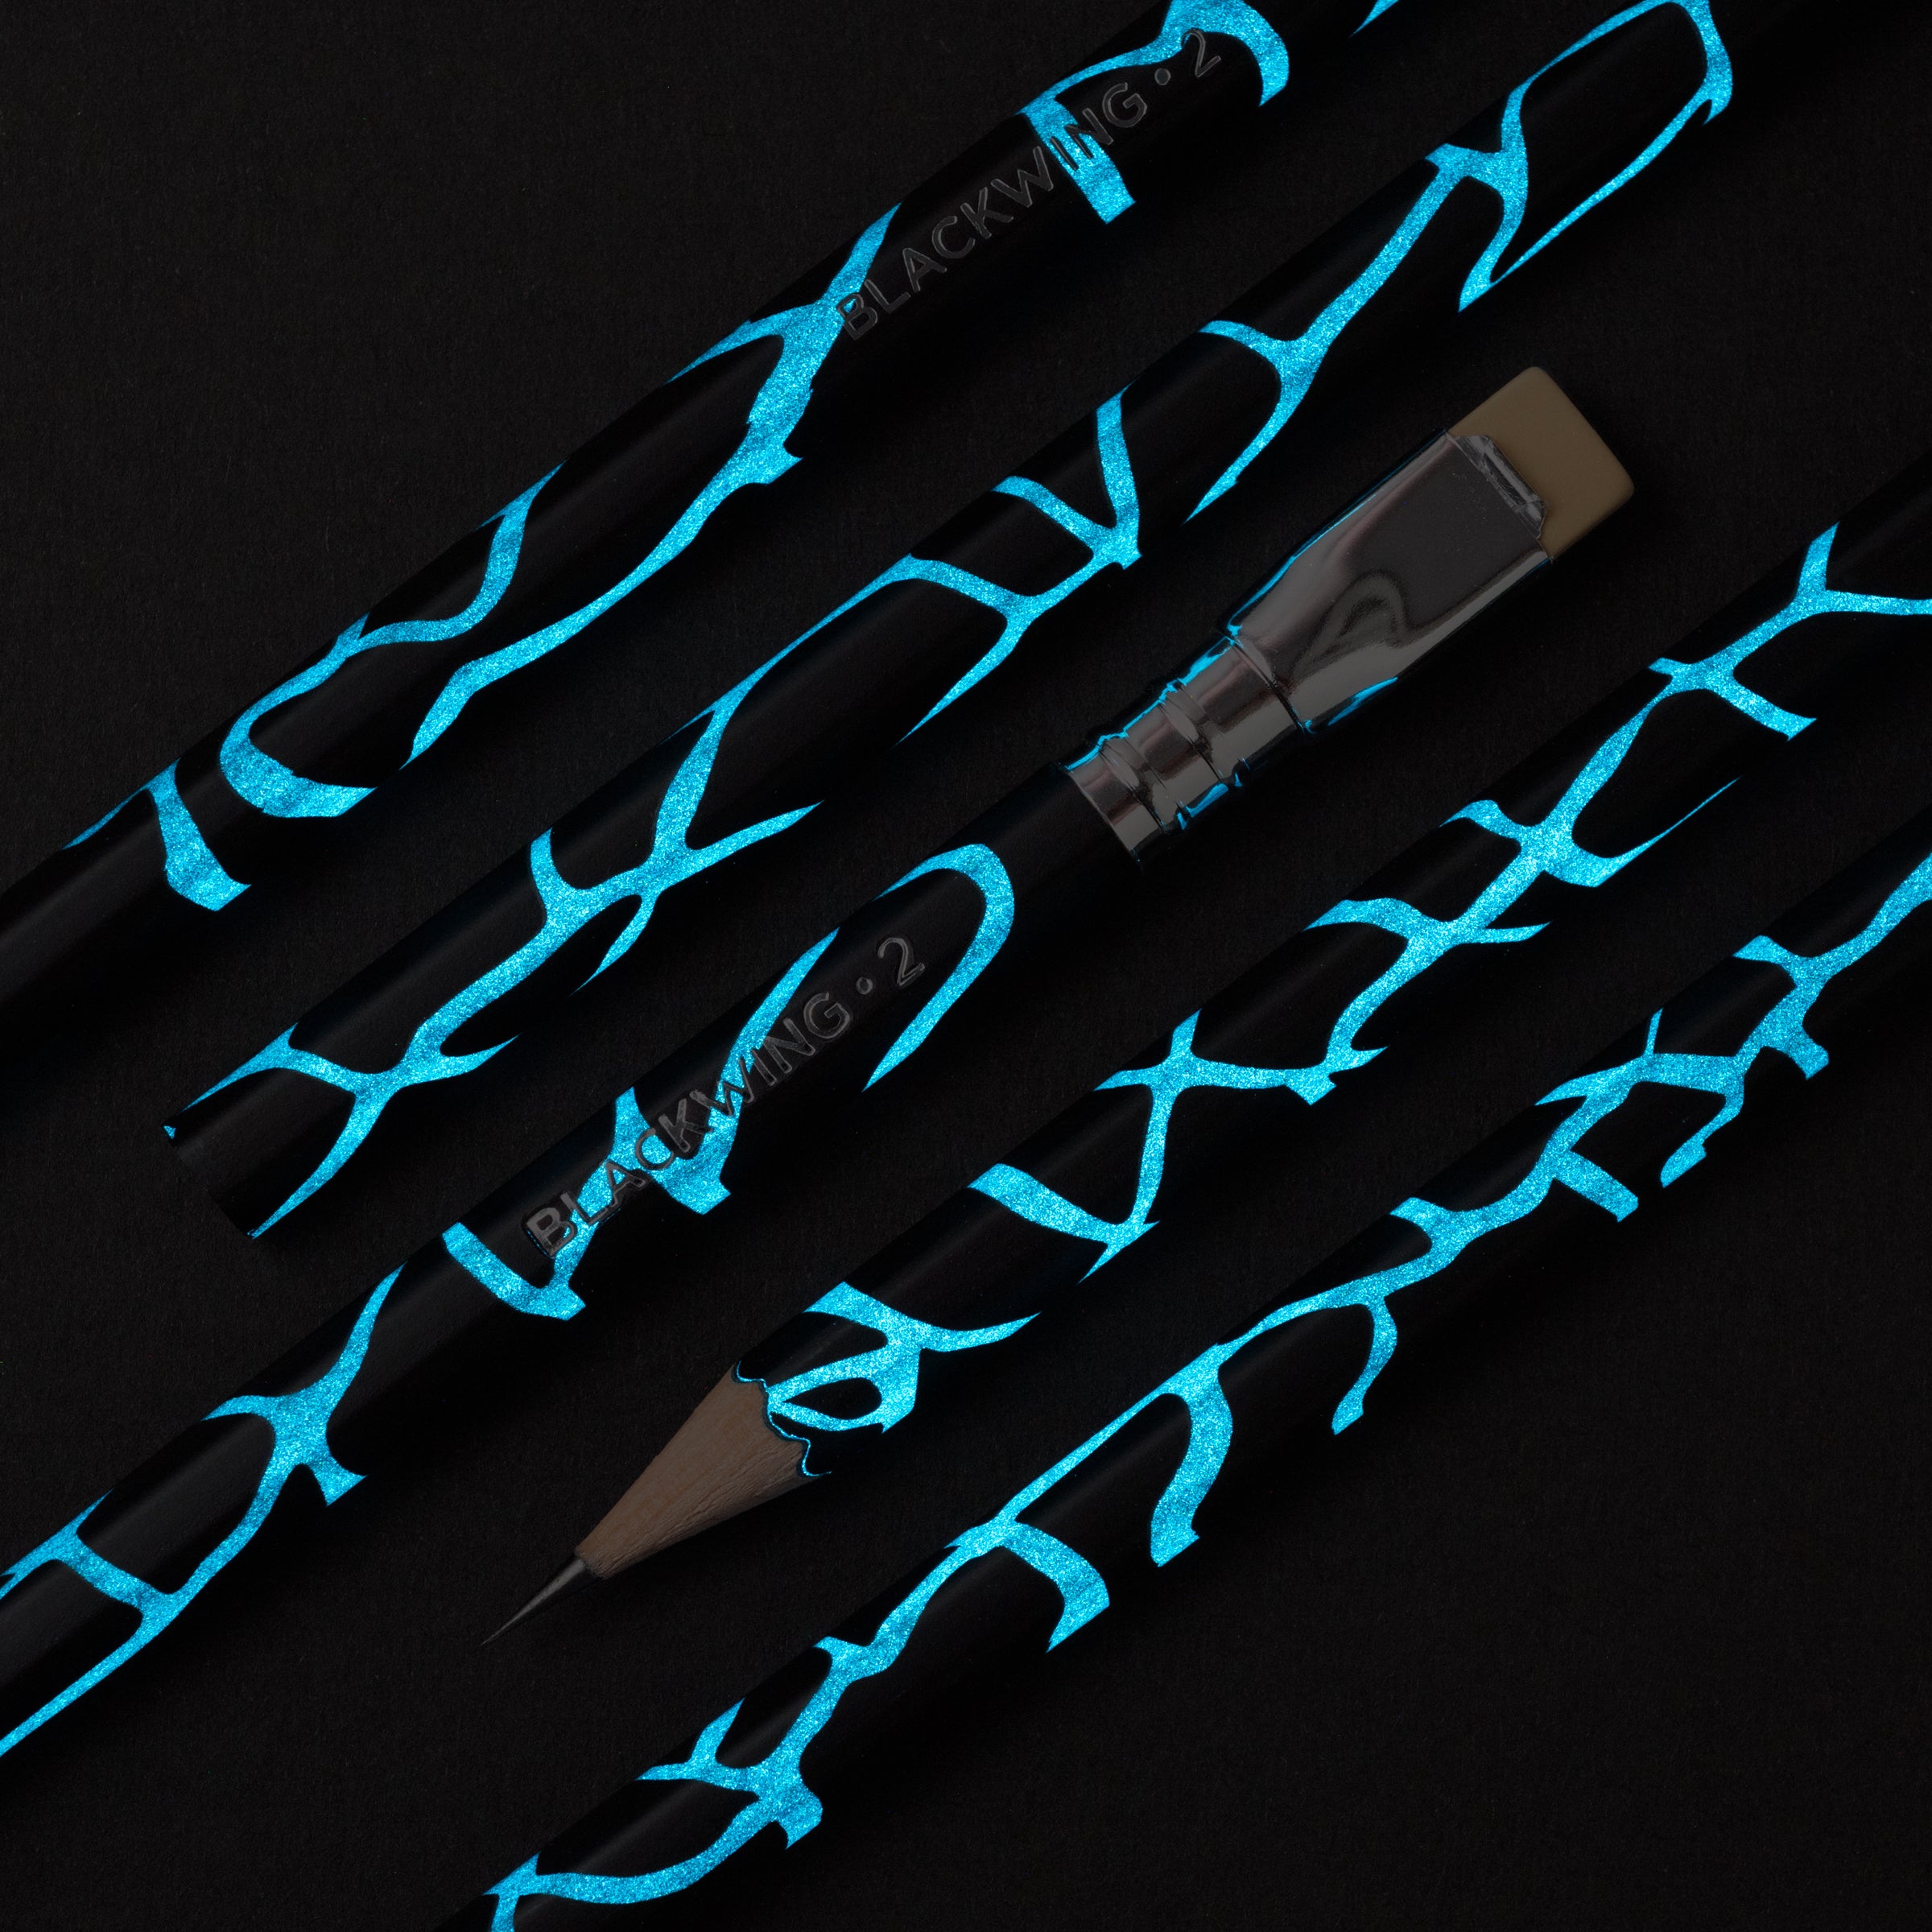 A set of Blackwing Volume 2 pencils with artistic blue designs.